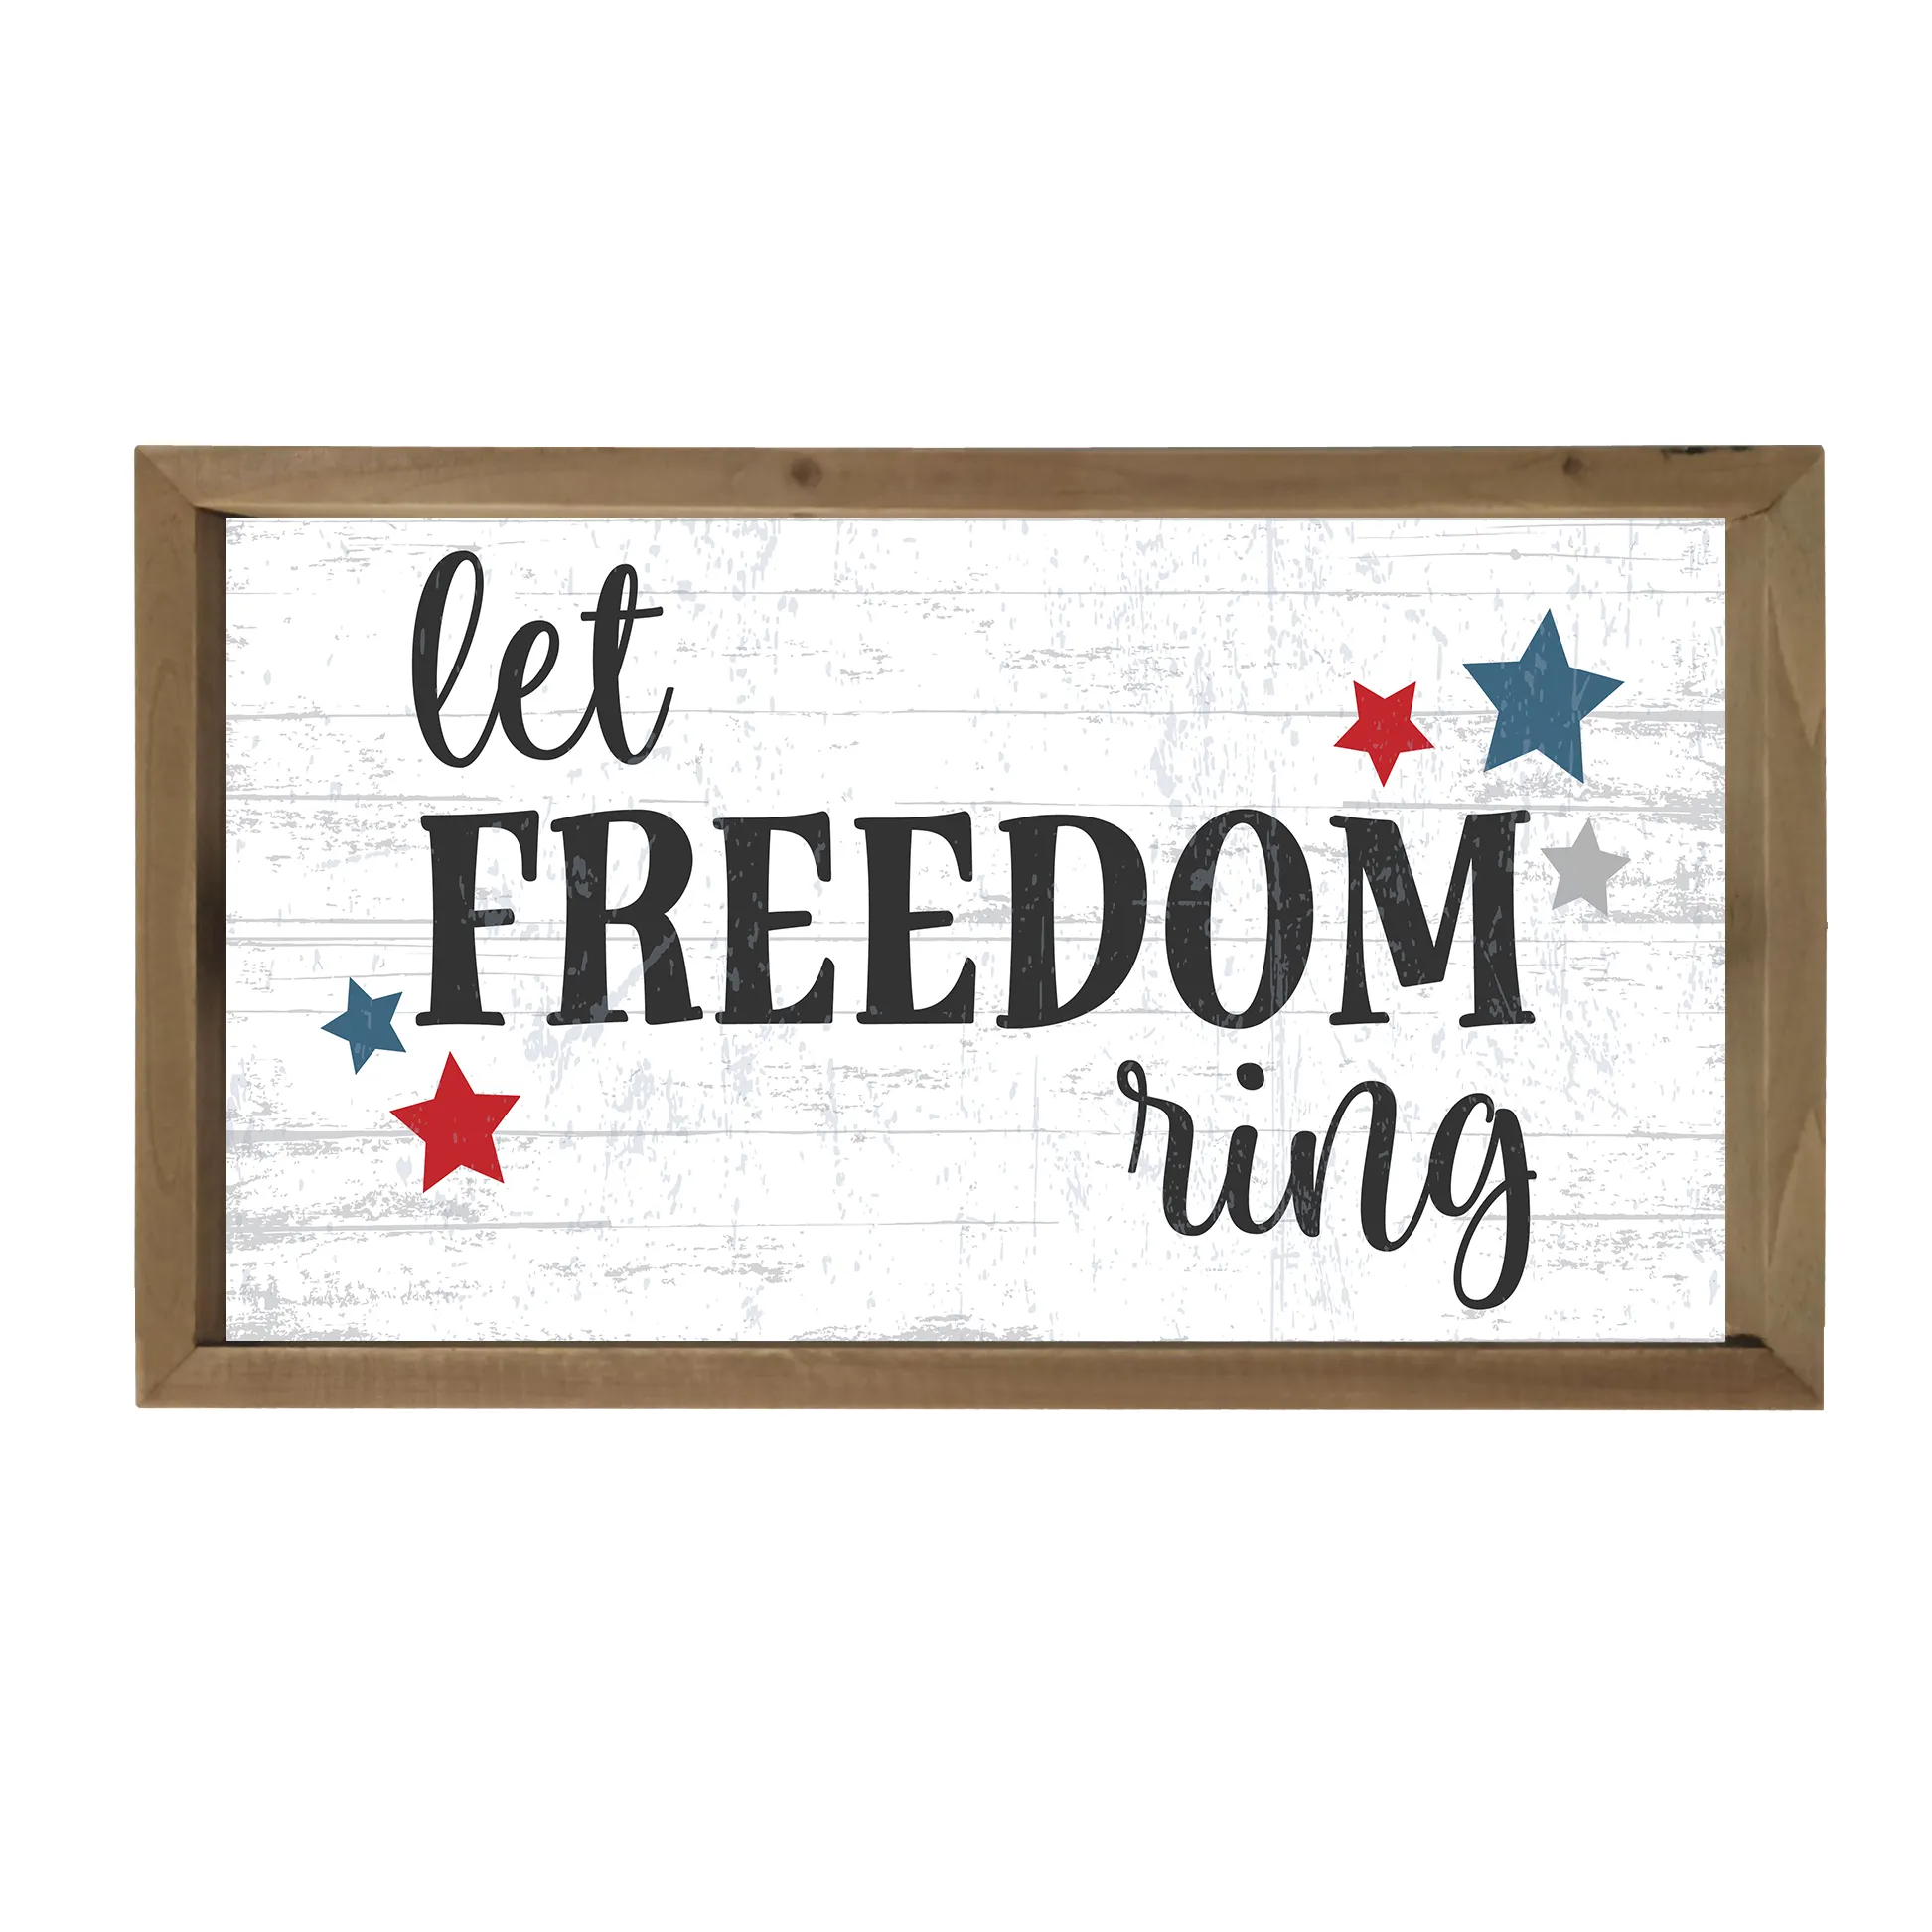 let freedom ring Wall Art Sign Wood framed sign quote let freedom ring wood wall plaque rustic farmhouse wall decor